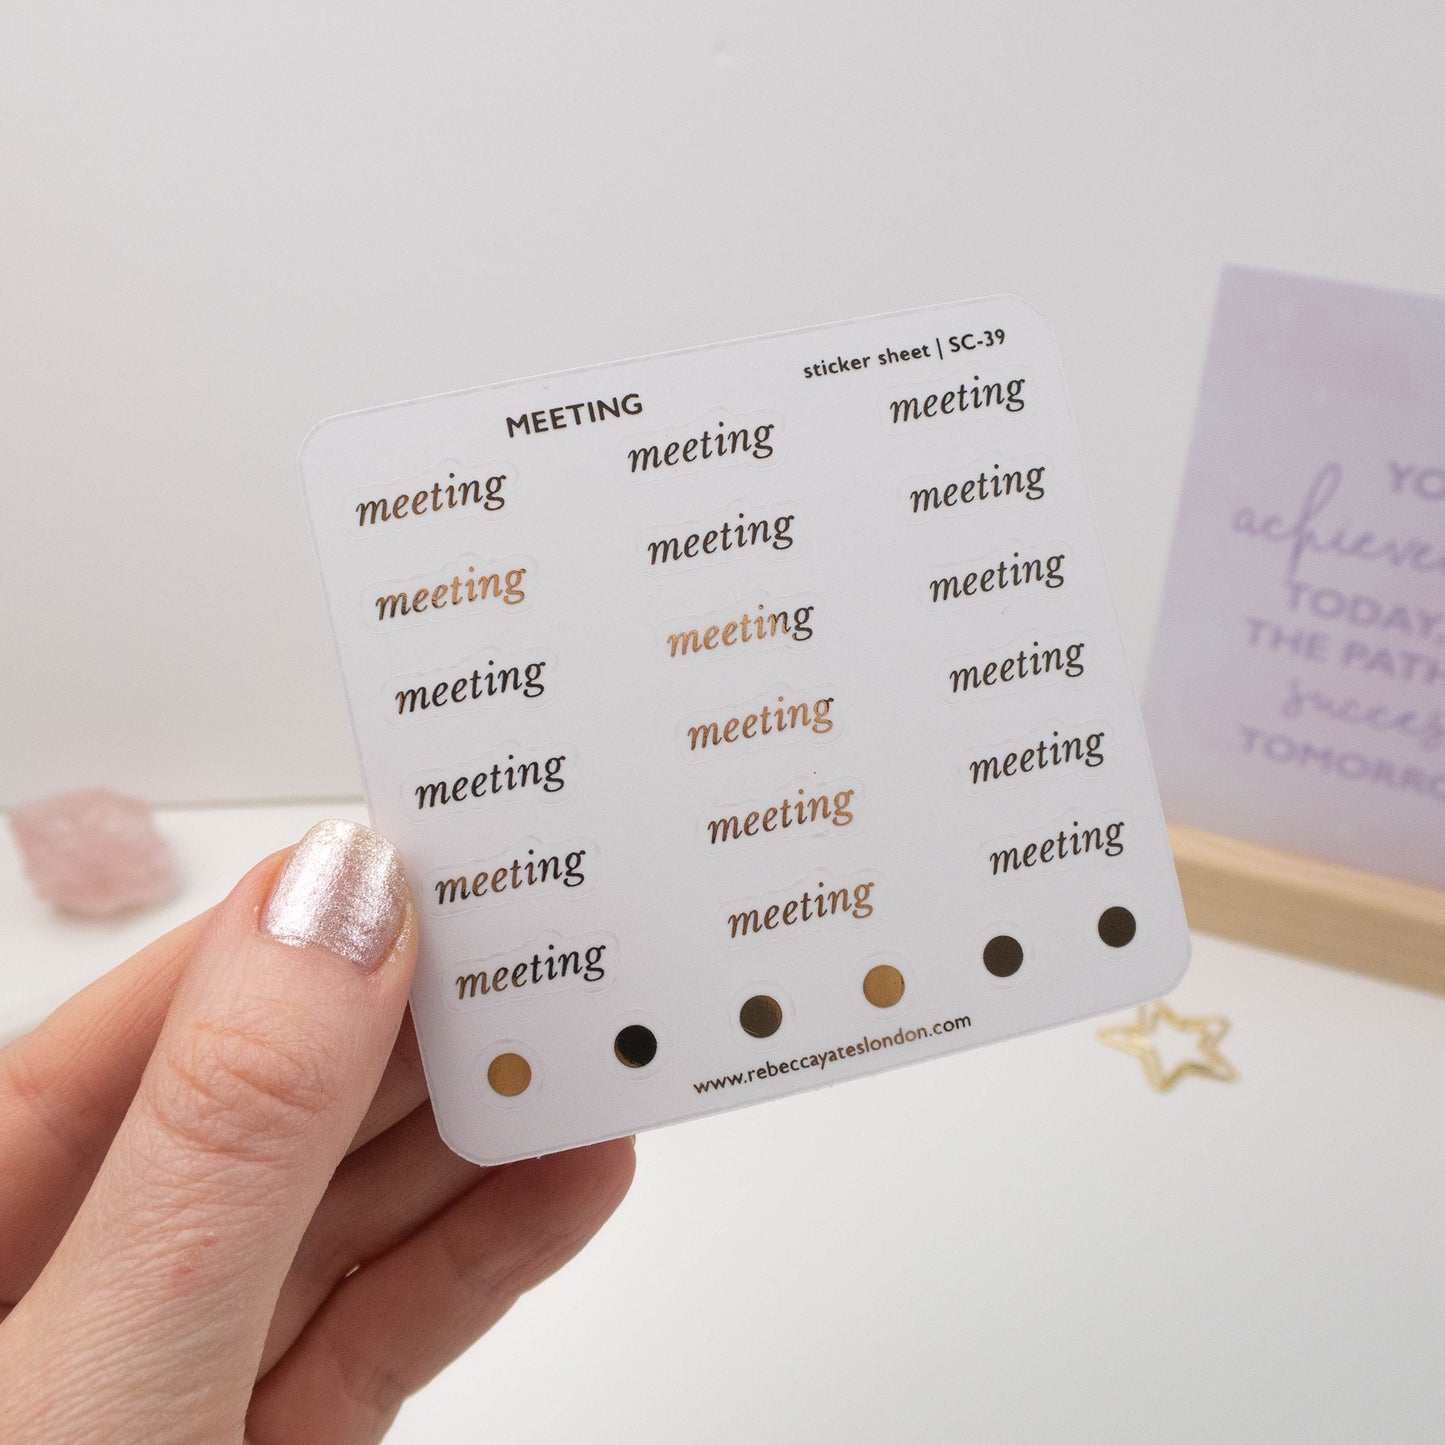 MEETING - FOILED SCRIPT STICKERS